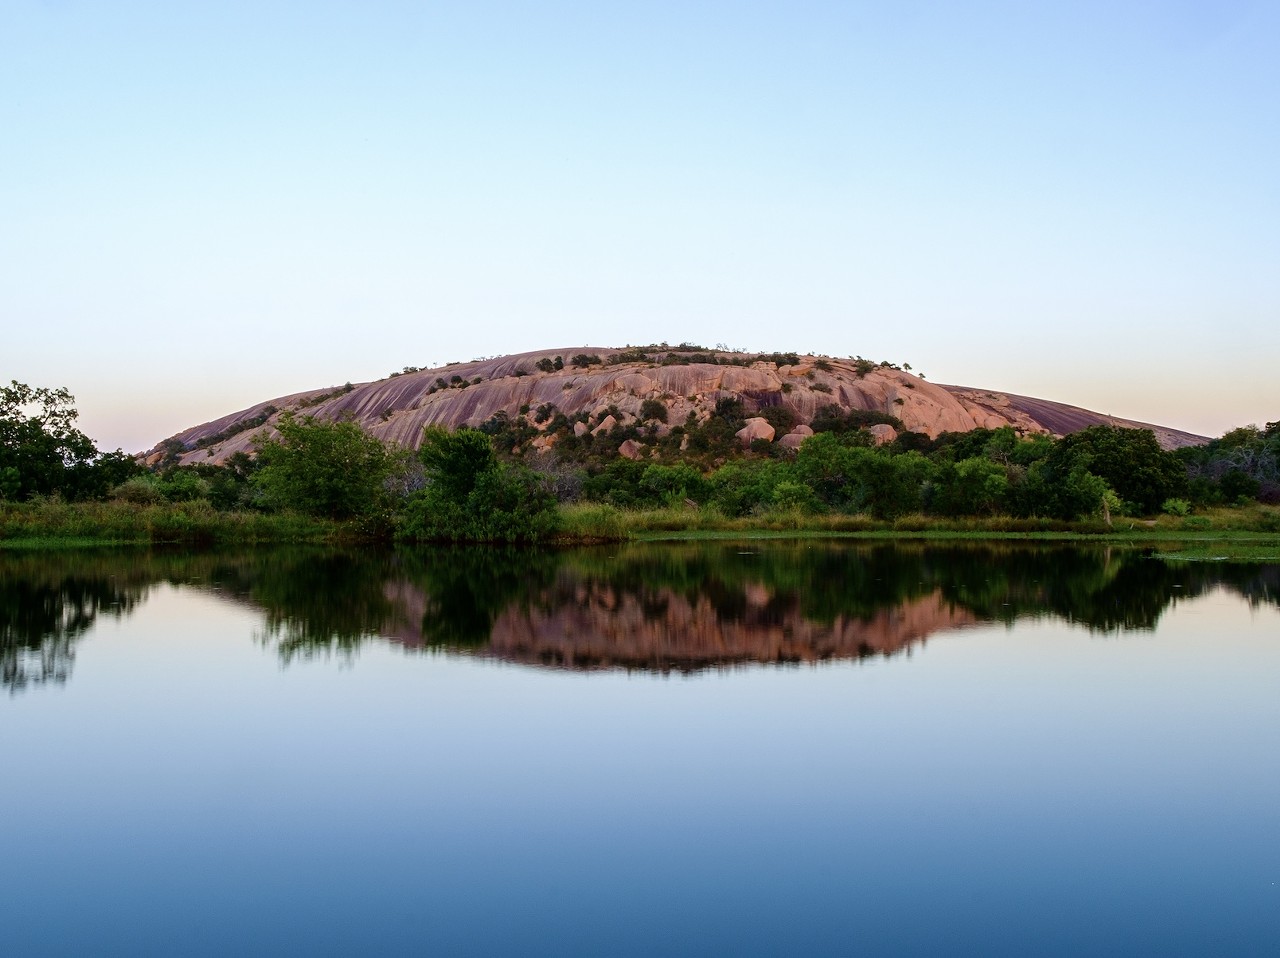 Enchanted Rock State Natural Area
16710 Ranch Road 965, Fredericksburg, (830) 685-3636, tpwd.texas.gov
Climbing the pink granite dome of Enchanted Rock is a local right of passage for local outdoors enthusiasts. Beyond its namesake, this park also offers camping, hiking, rock climbing and amazing stargazing views.